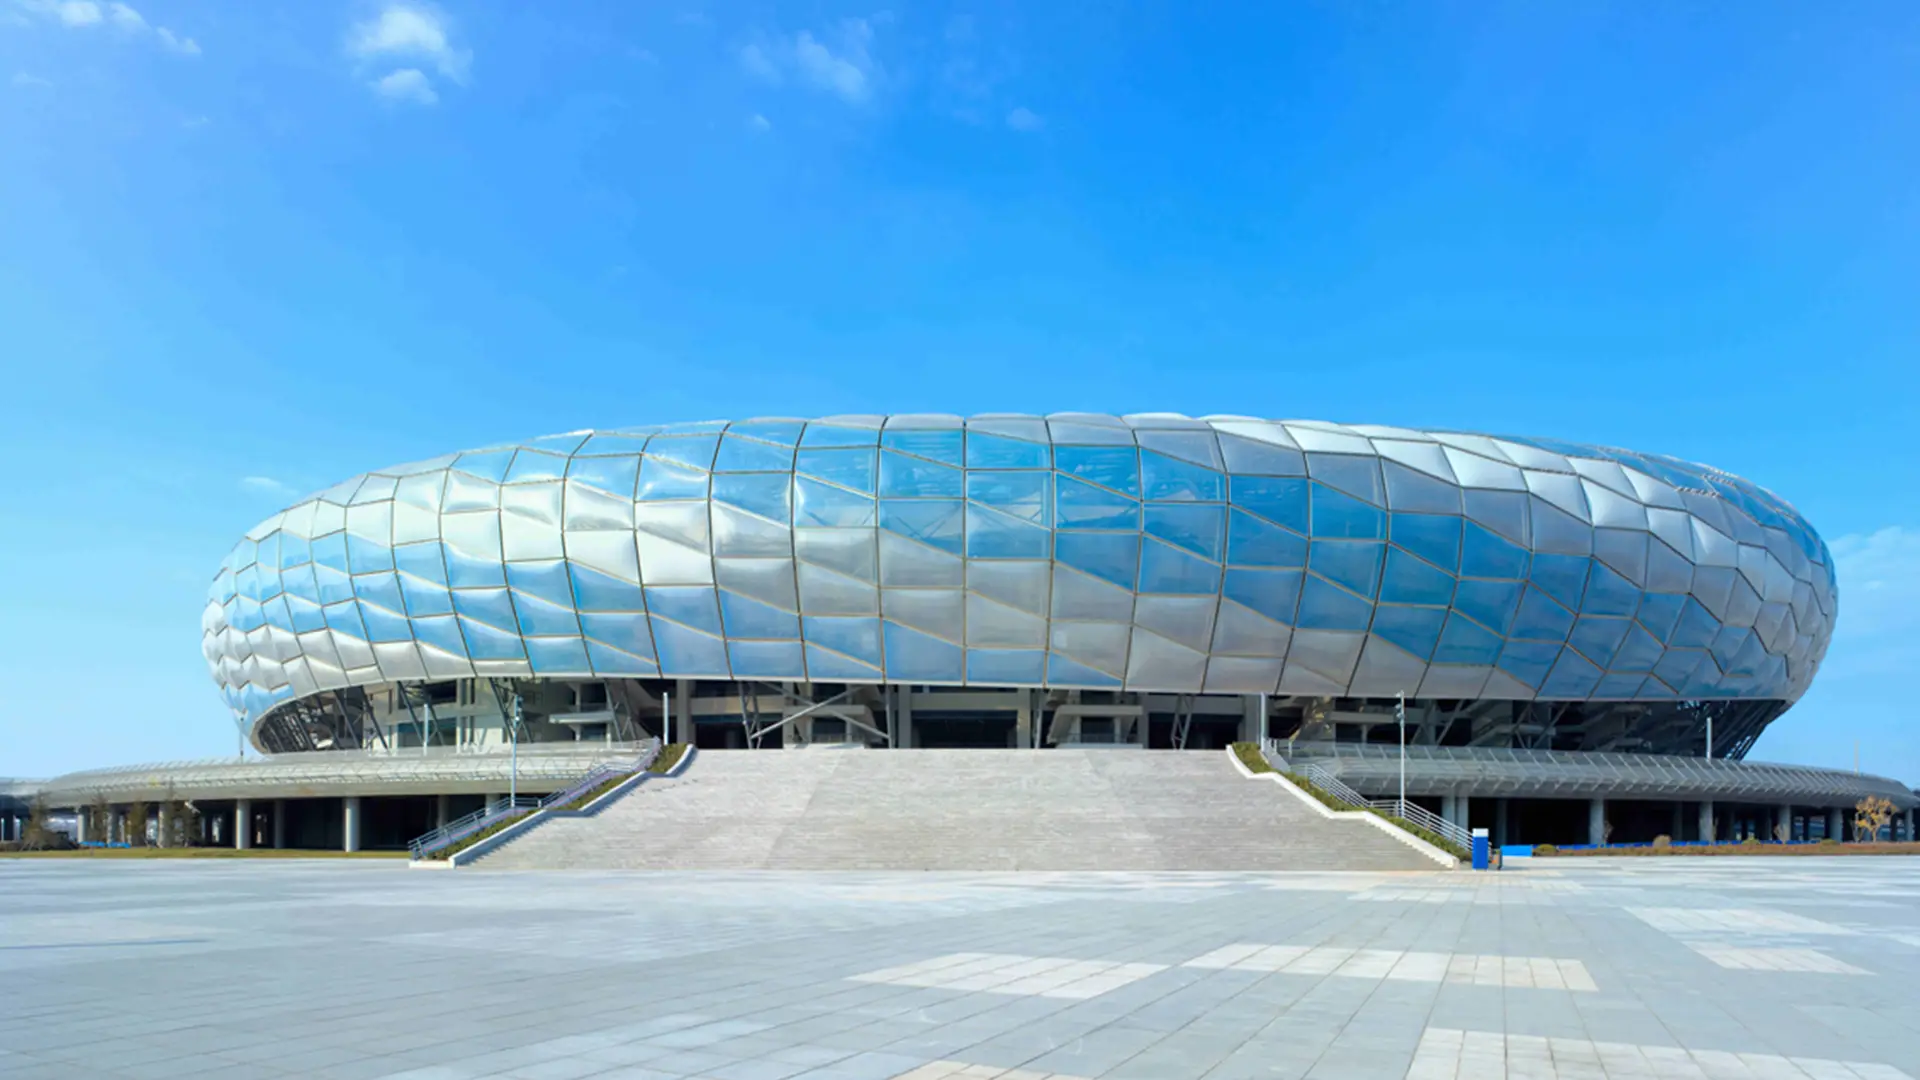 Architectural Design&Research of HIT and Nadel&Hwa Associates selected Texlon® ETFE as the cladding for this complex elliptic form of DaLian stadium.